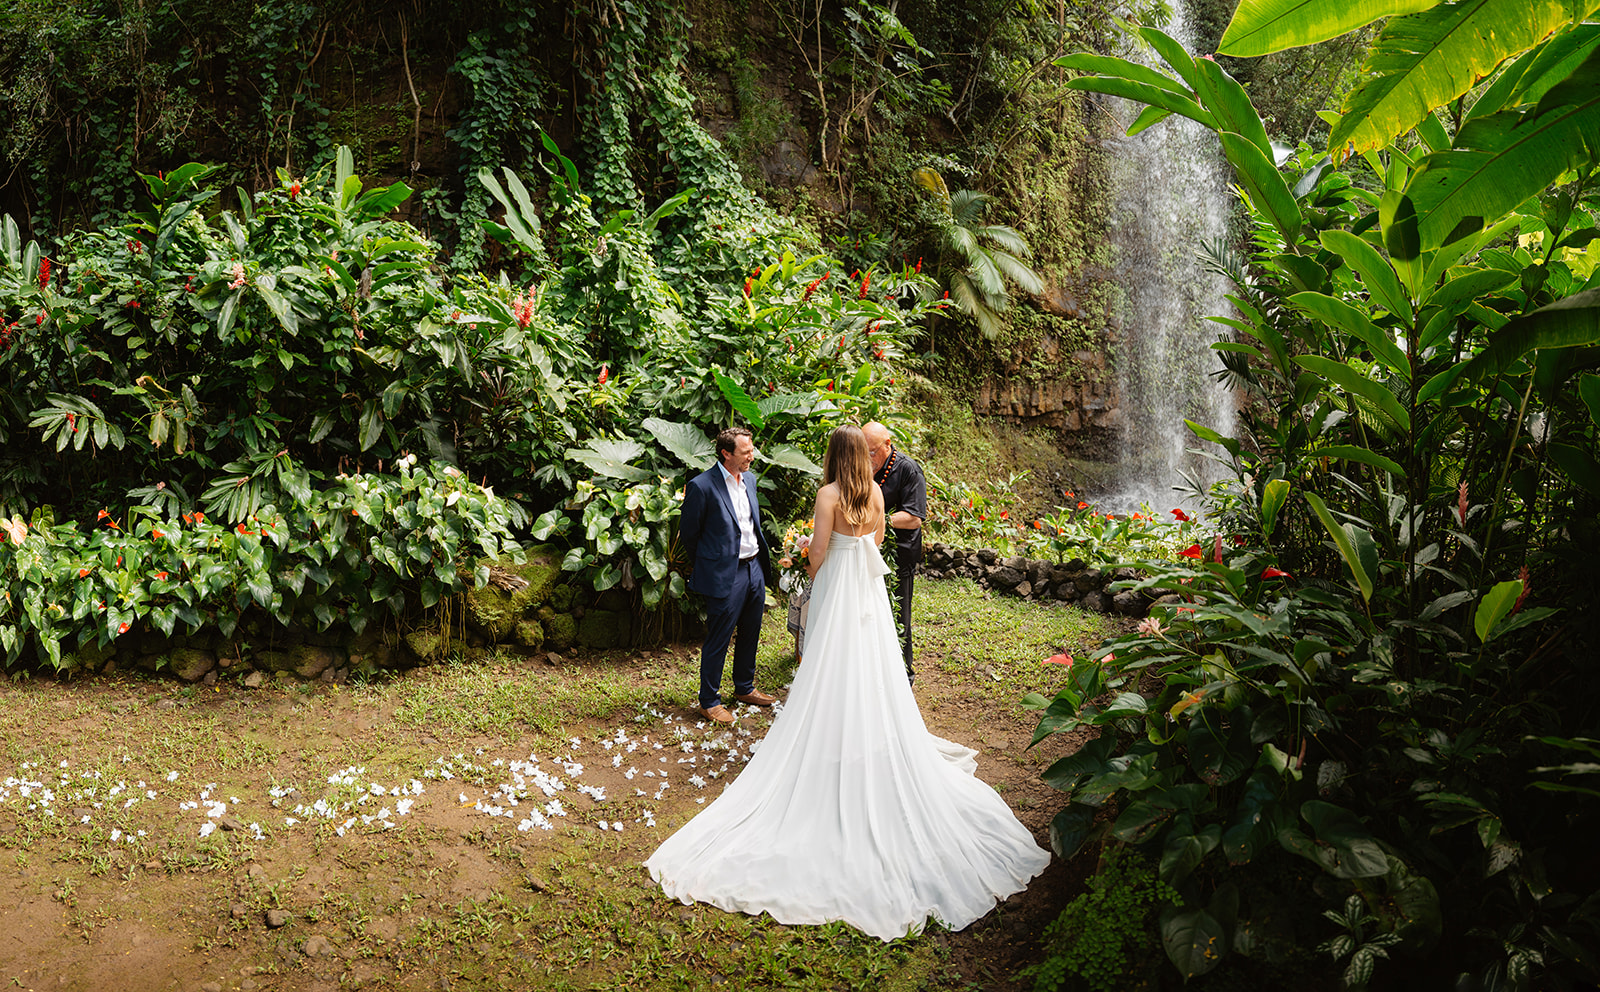 A couple elopes at a secluded waterfall in Kauai, Hawaii